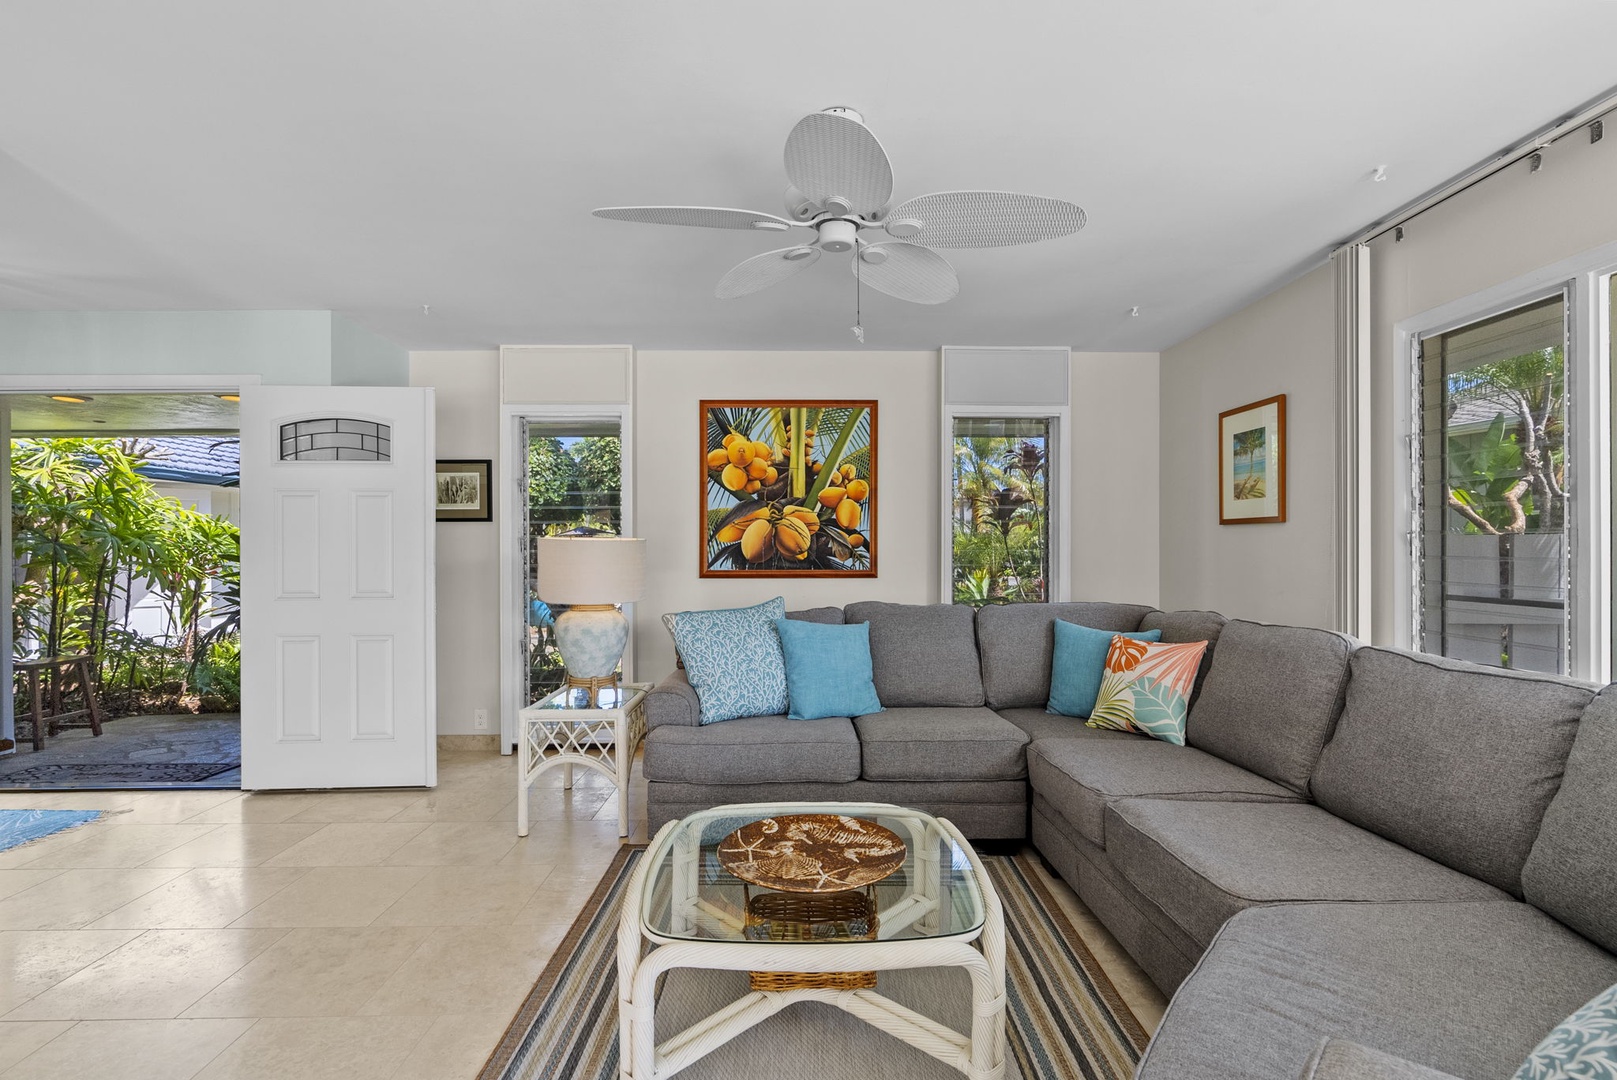 Kailua Vacation Rentals, Hale Aloha - Relax in this inviting living space, where soft tones and tropical artwork create the perfect island retreat ambiance.